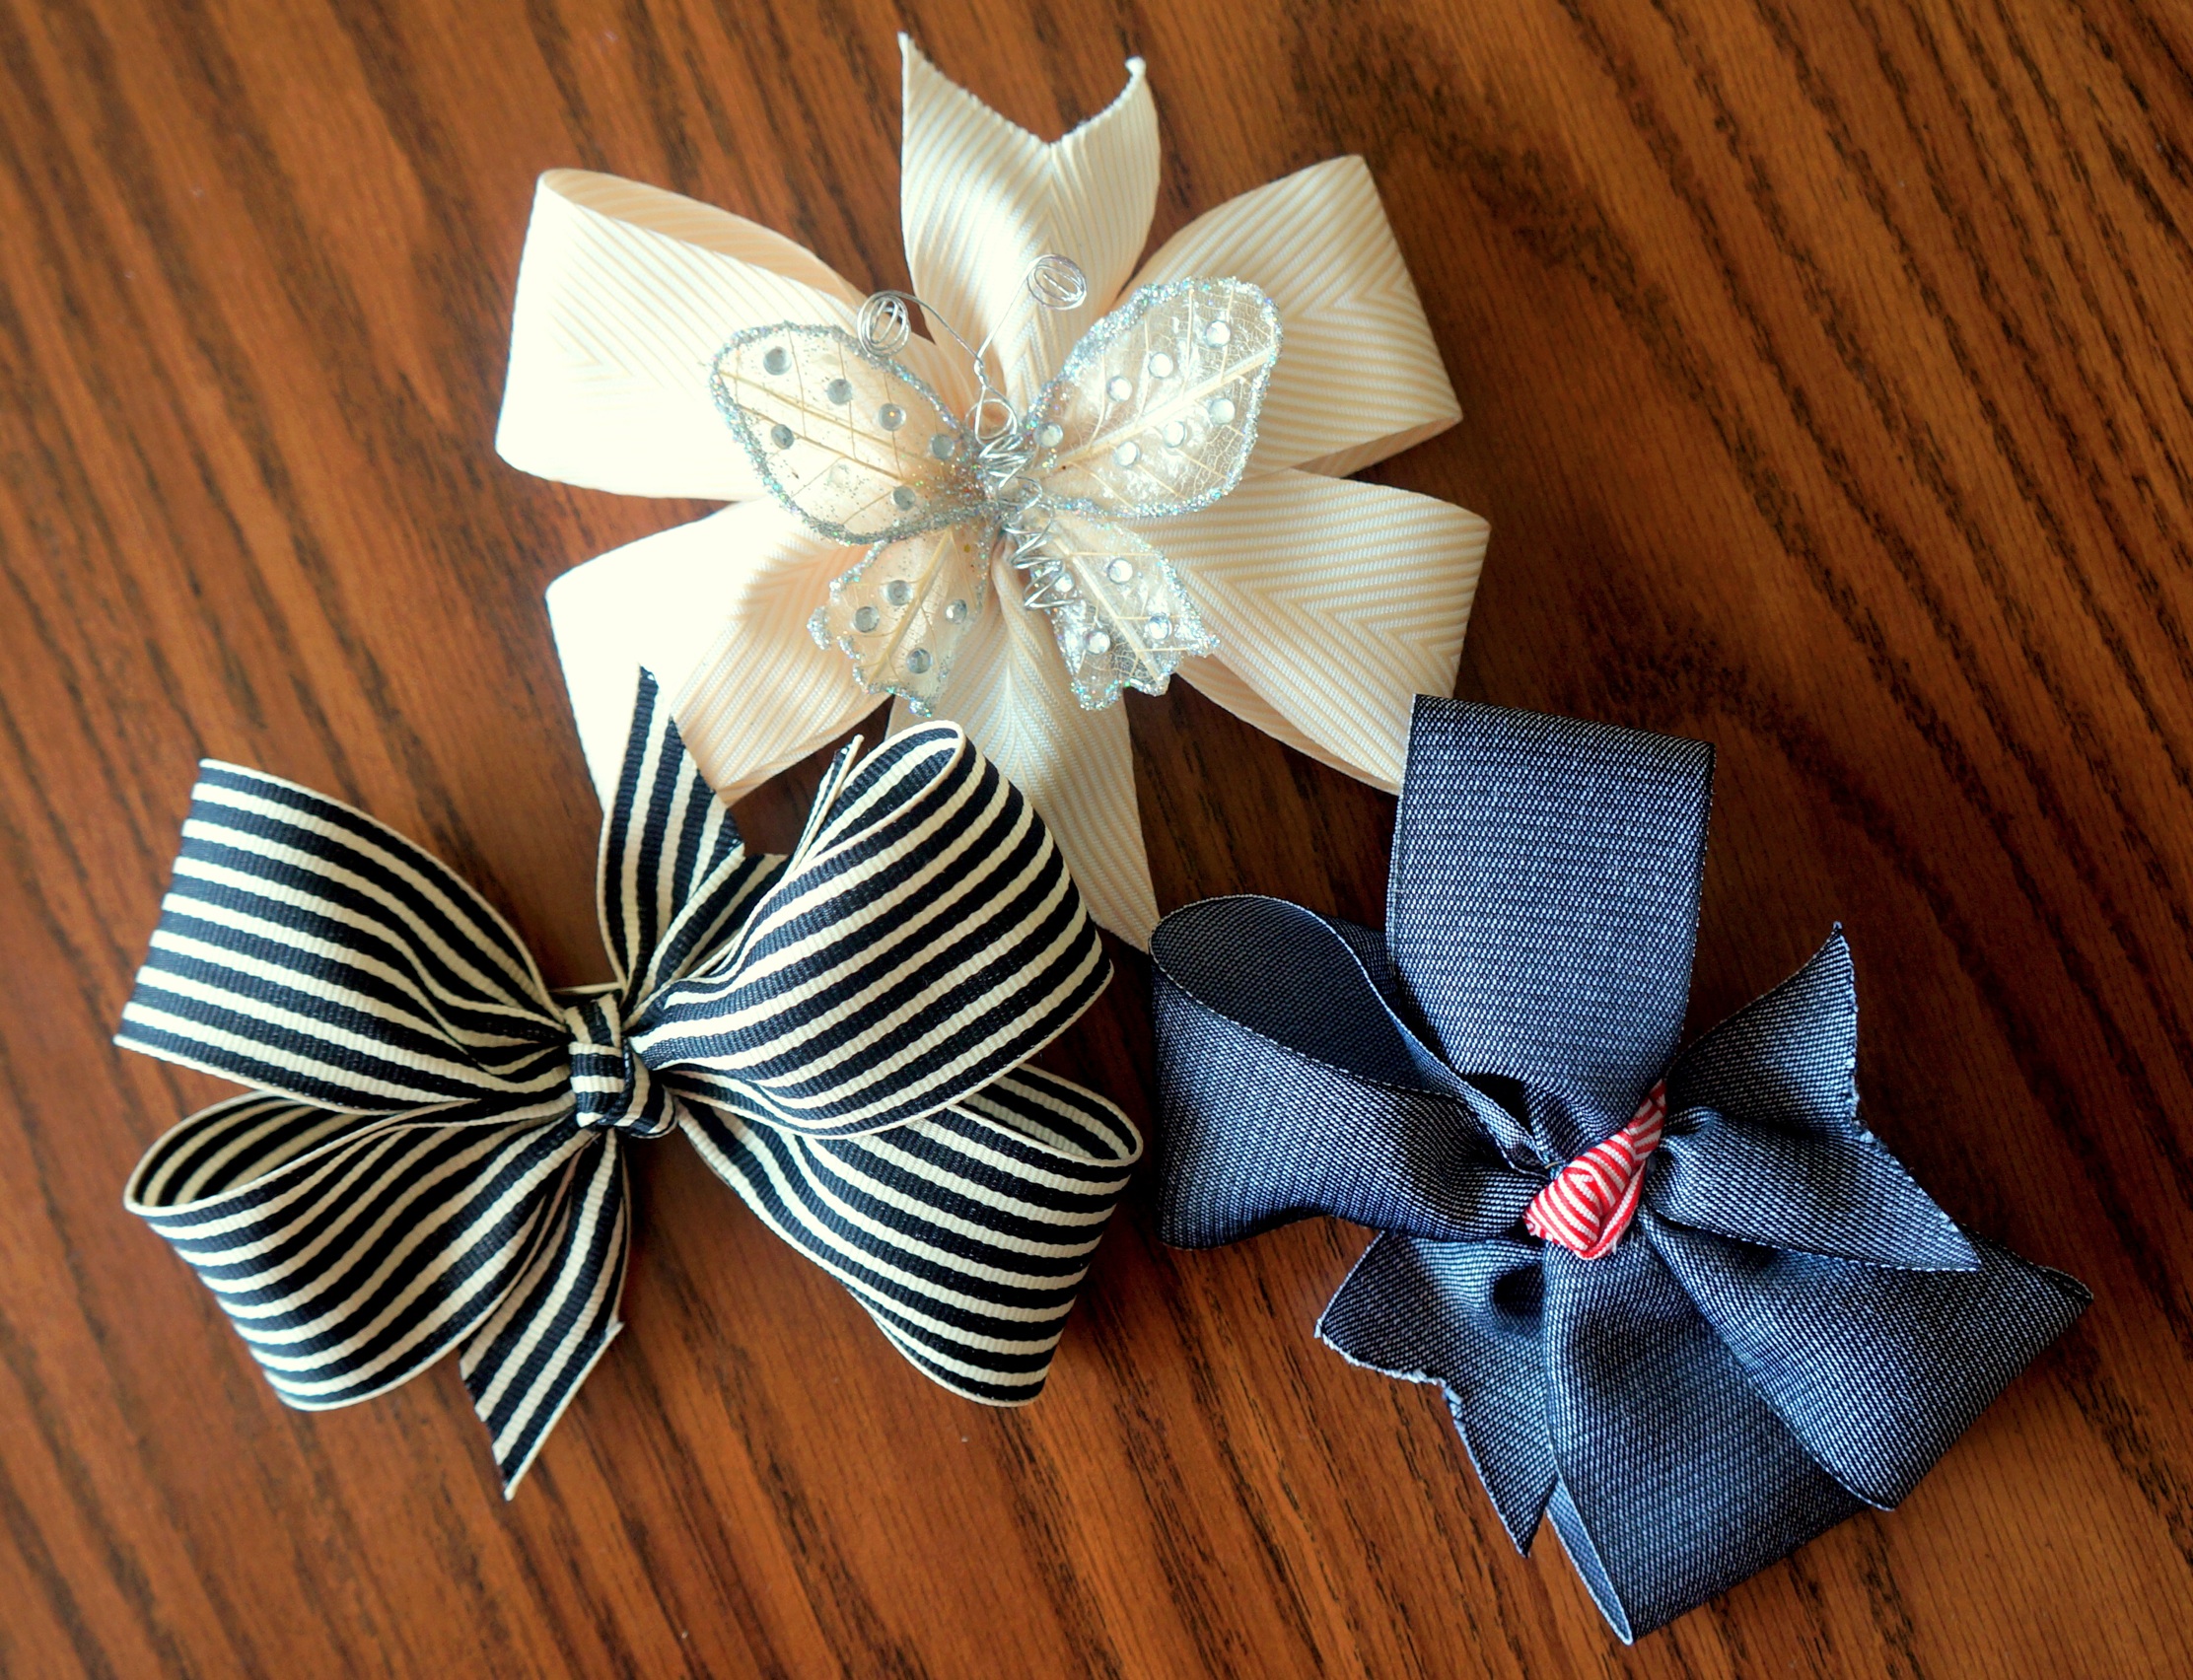 How to Make a Ribbon Bow - EASIEST Bow Tutorial